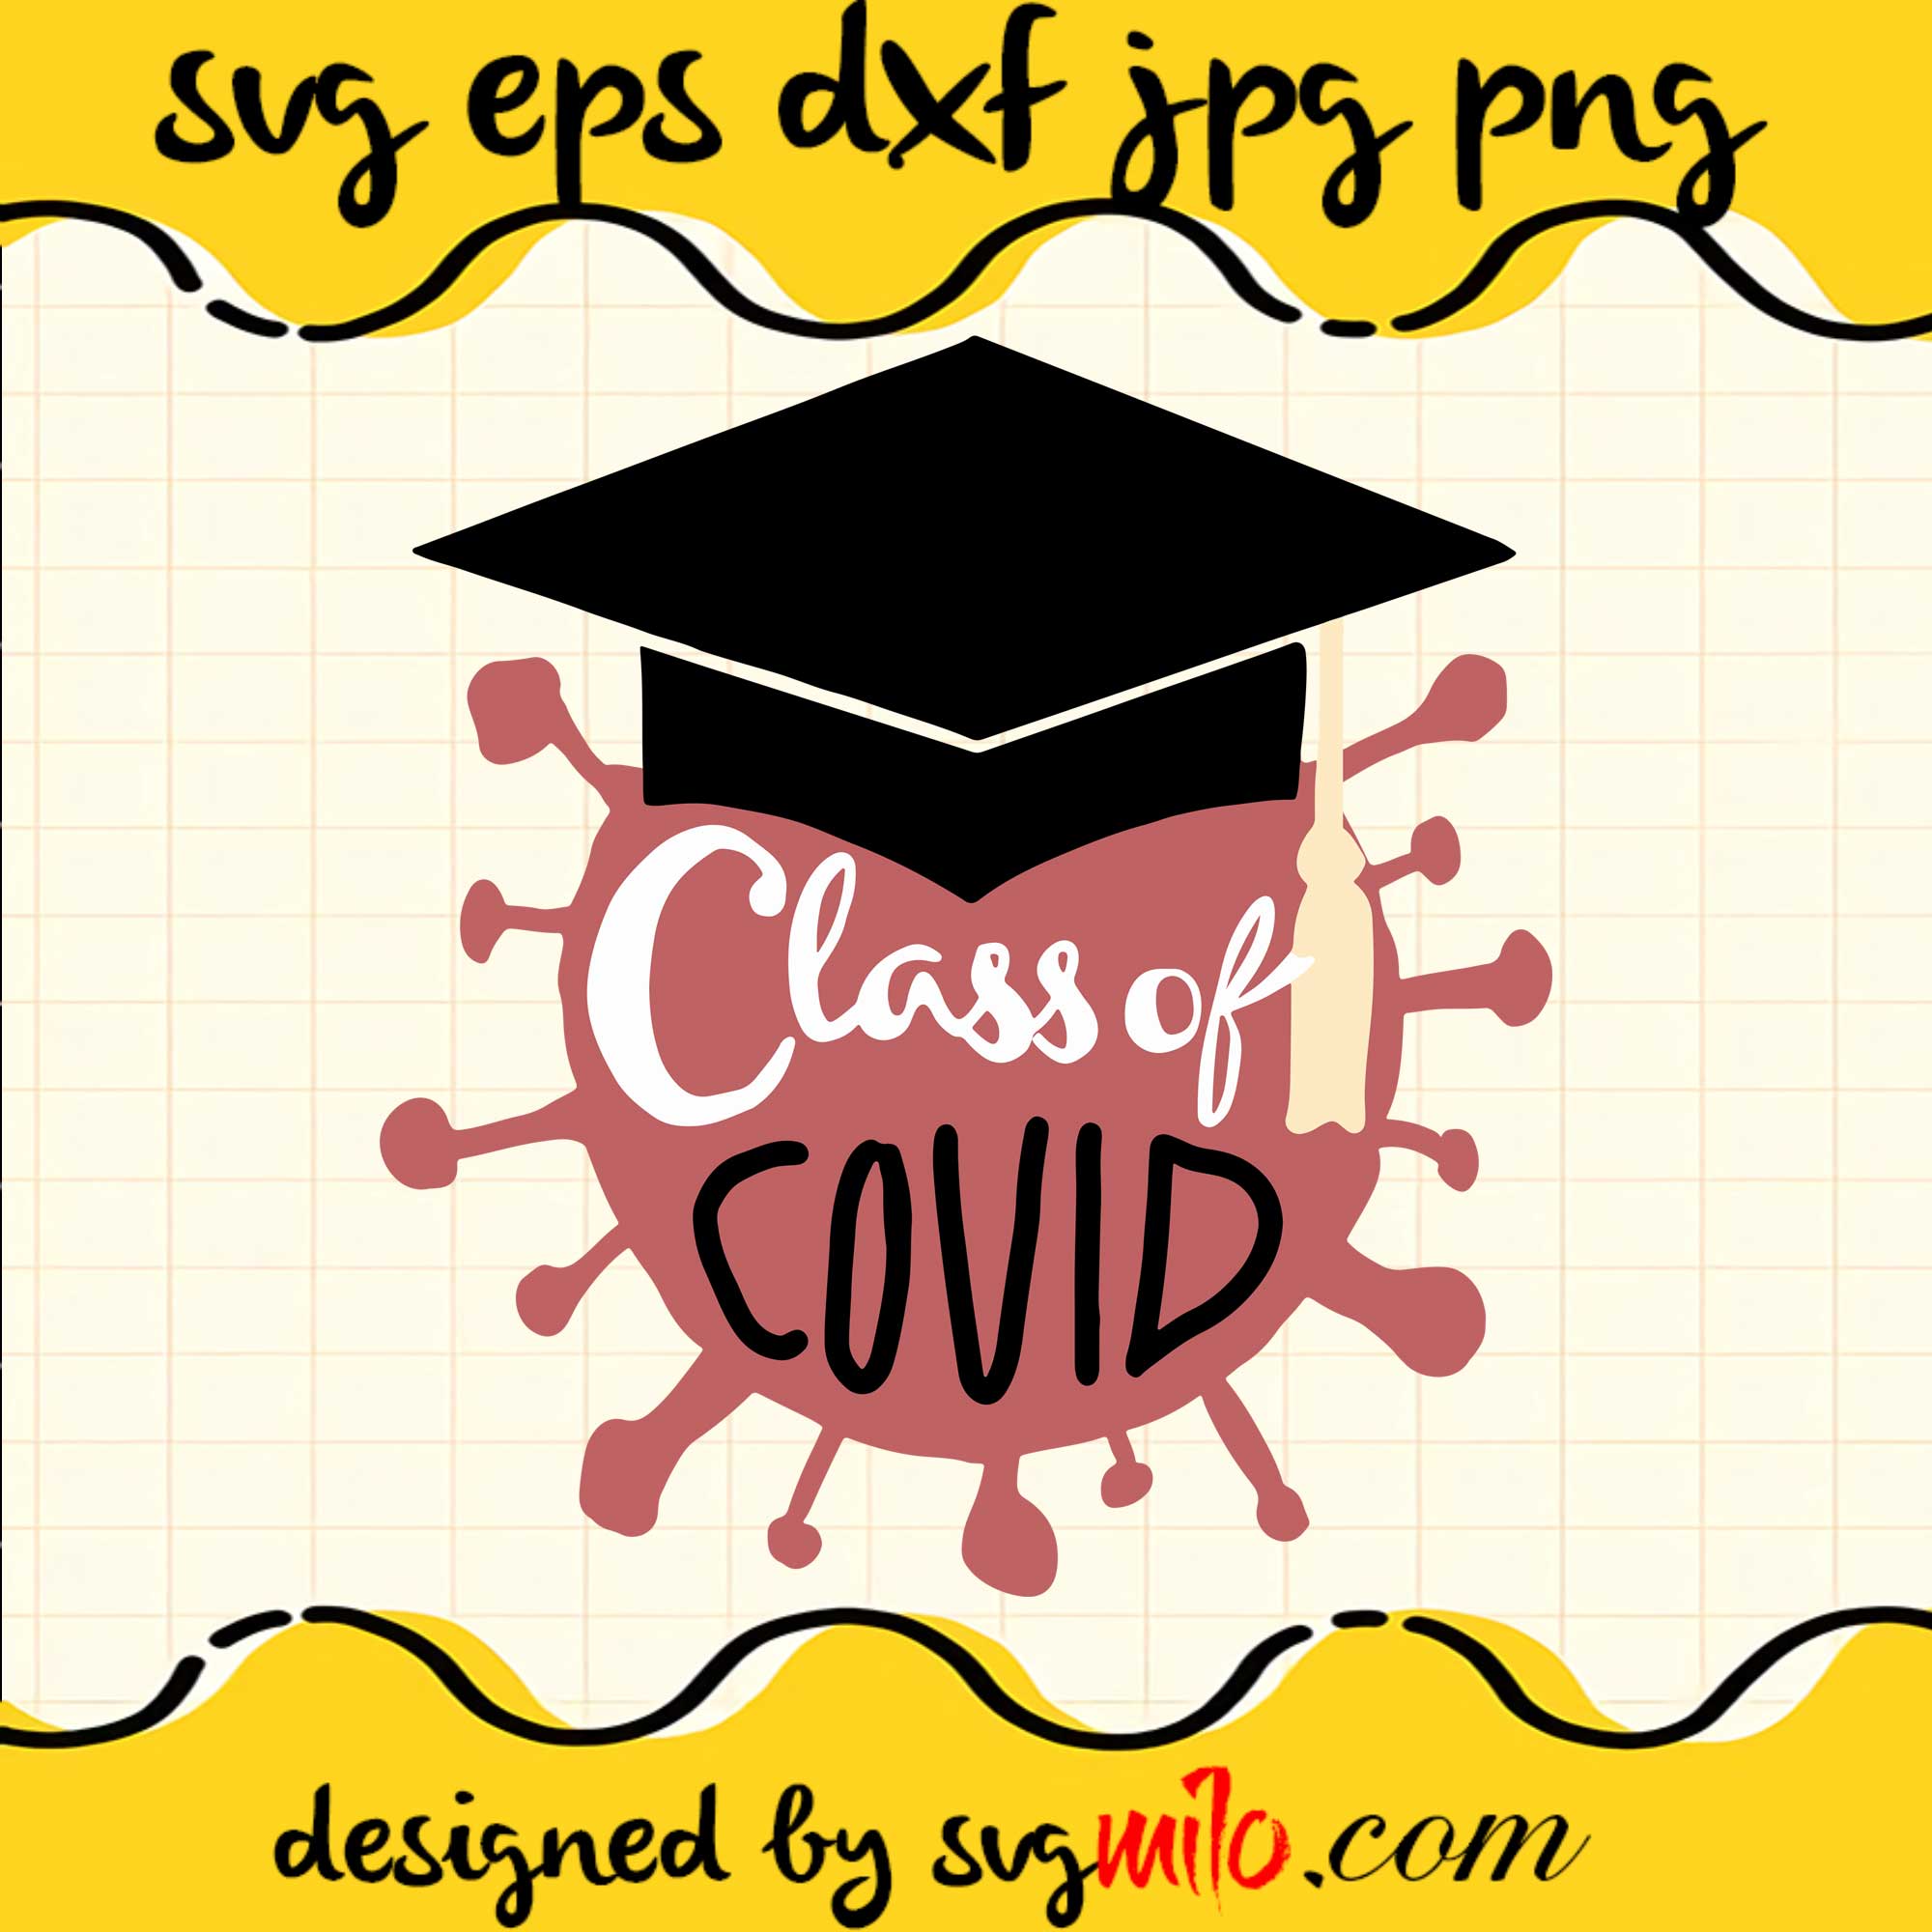 Class Of Covid SVG PNG DXF EPS Cut Files For Cricut Silhouette,Premium quality SVG - SVGMILO